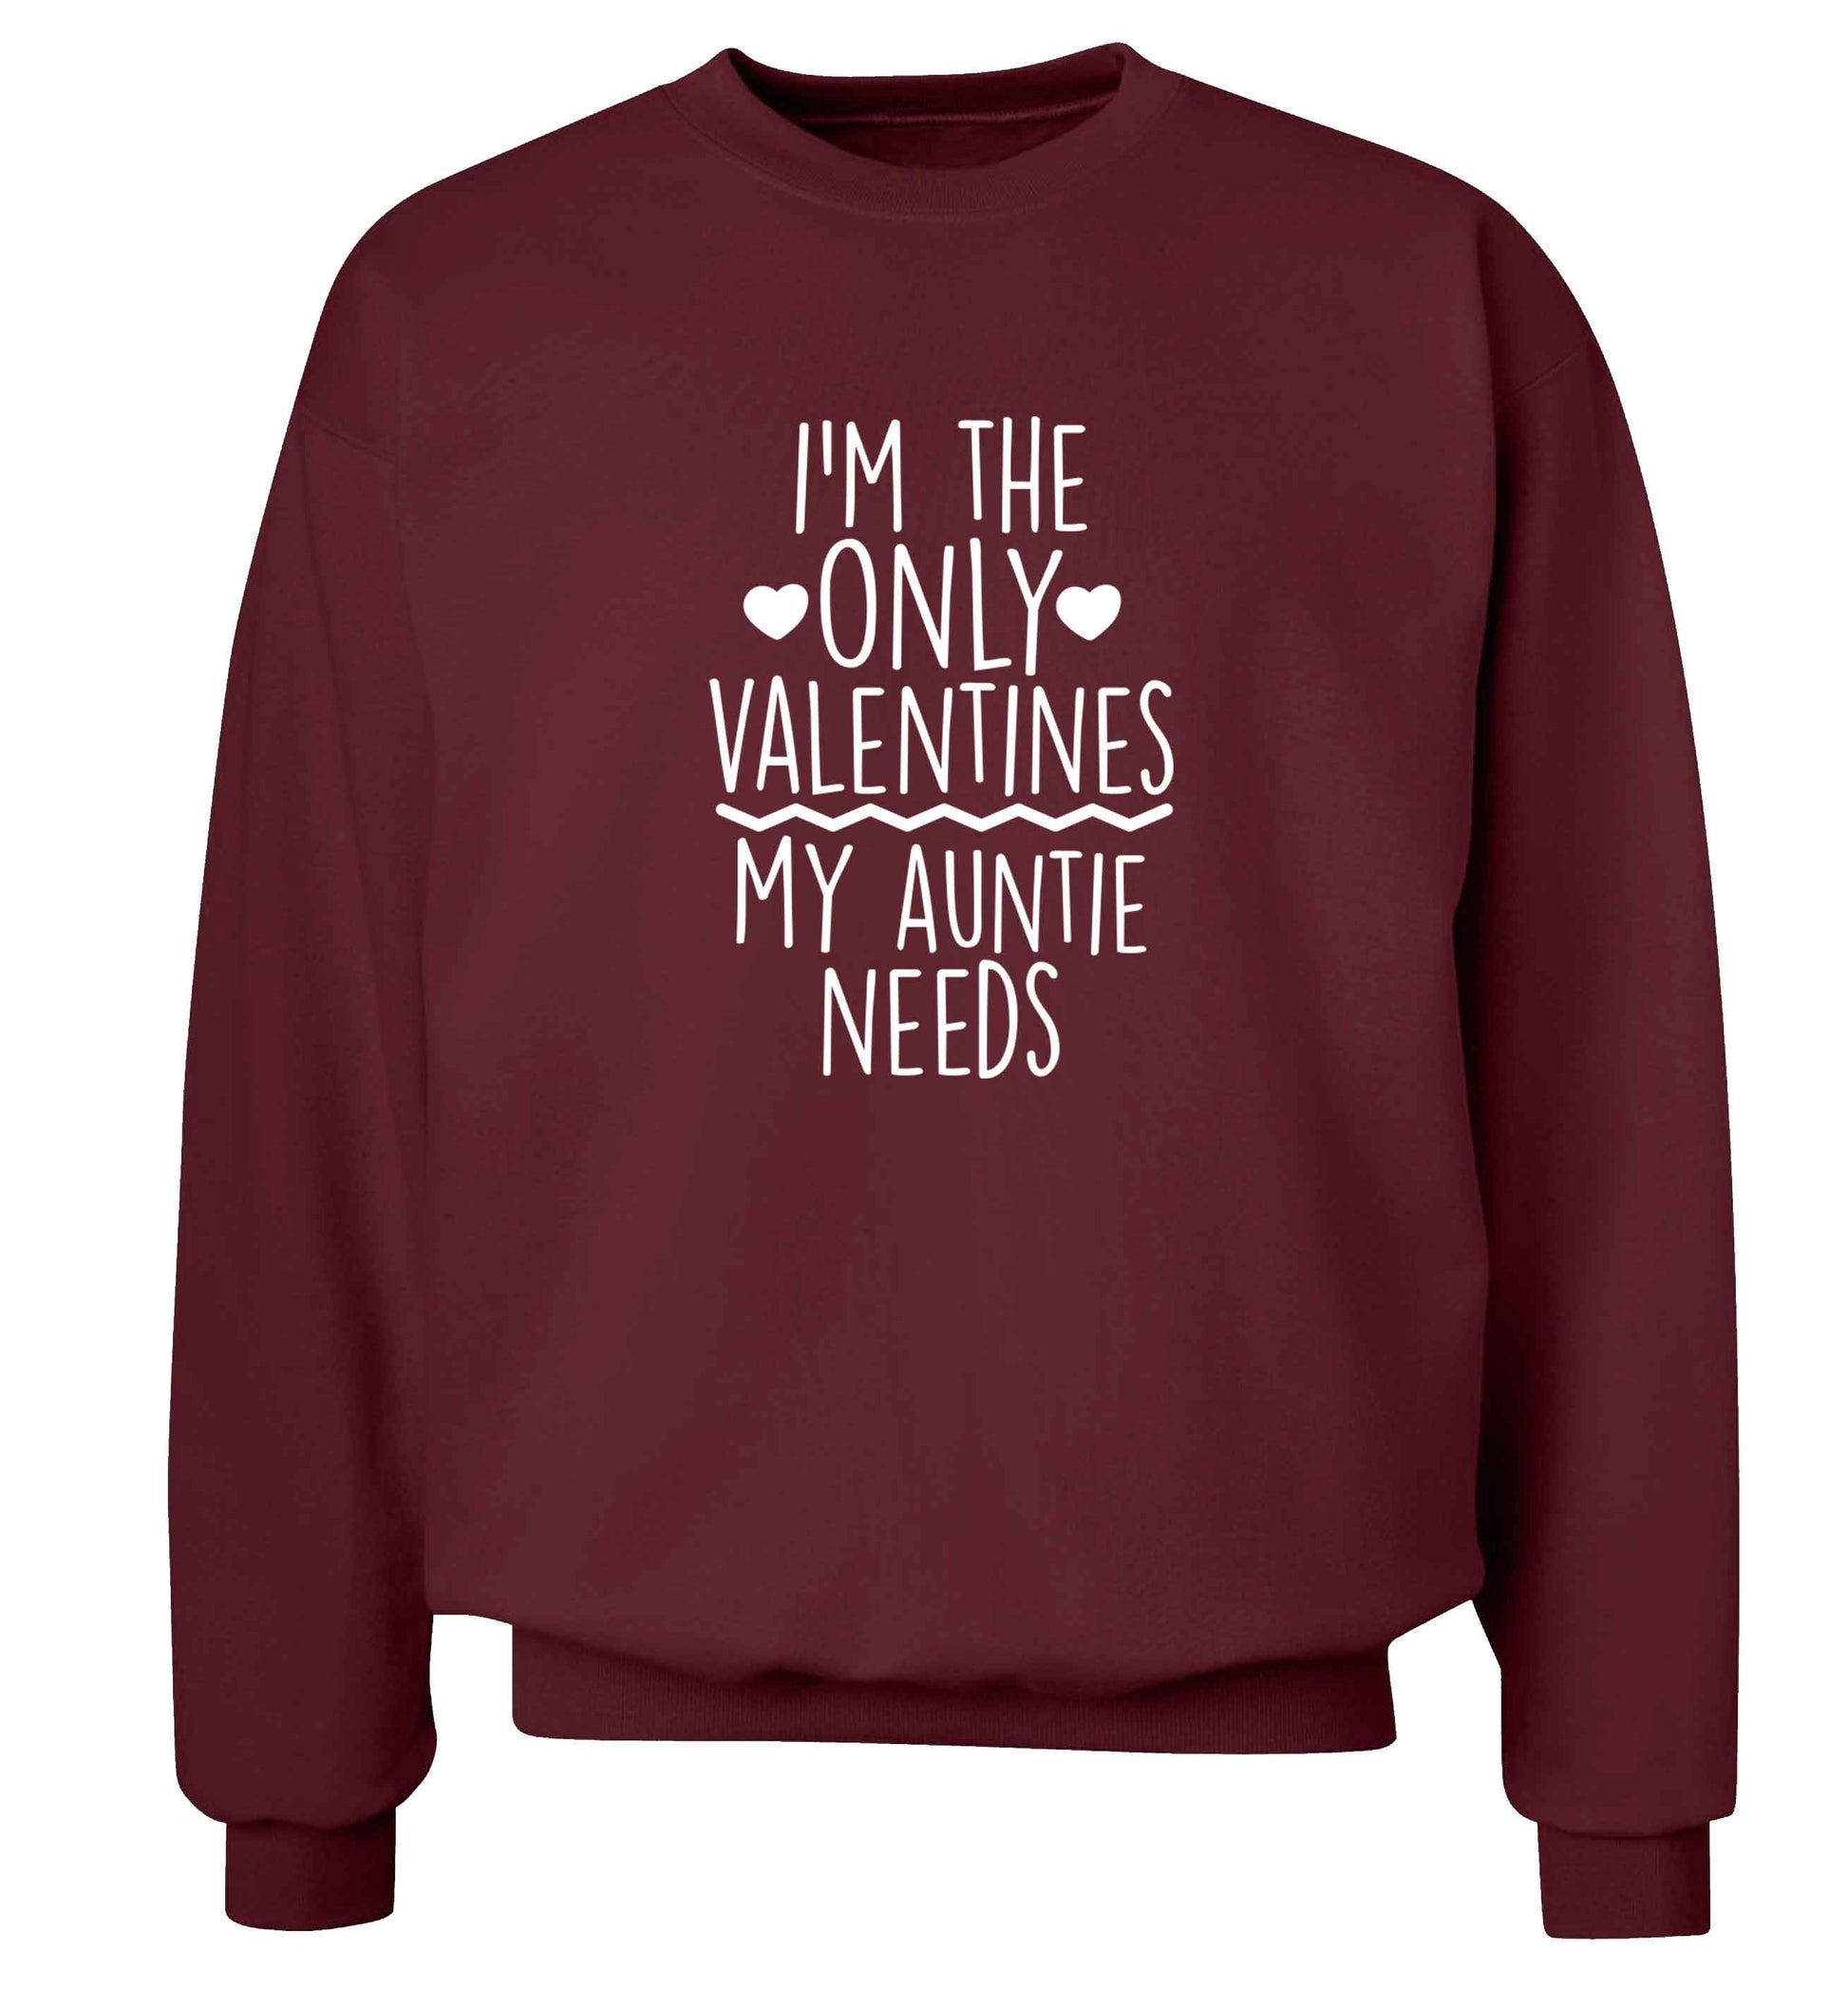 I'm the only valentines my auntie needs adult's unisex maroon sweater 2XL